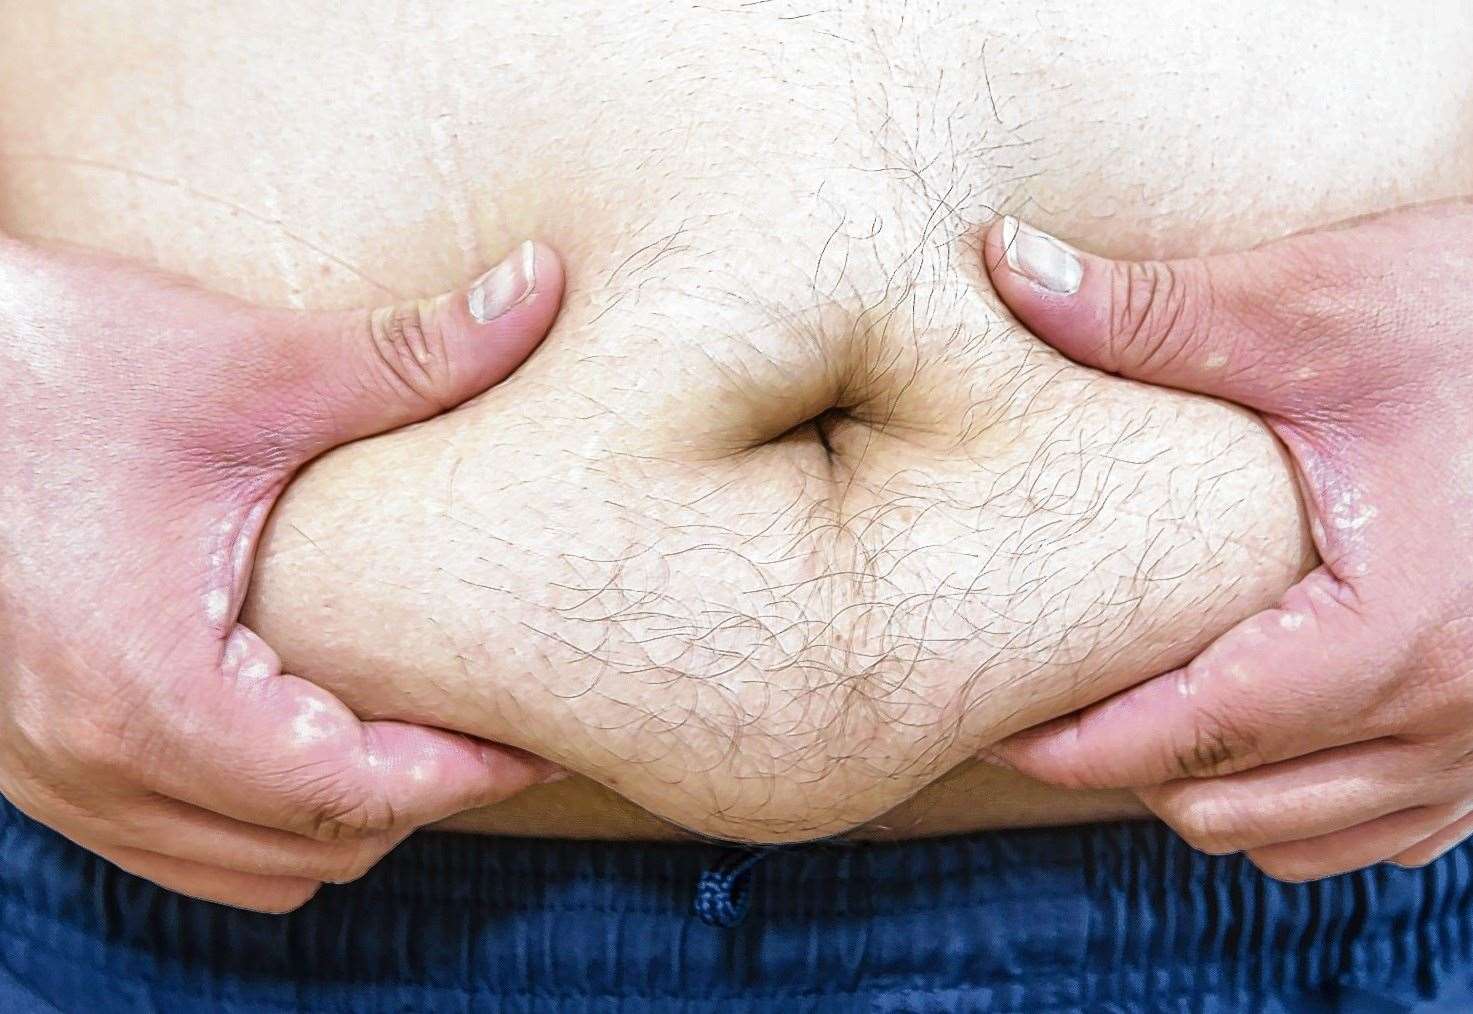 Obesity is on the rise in Kent. Stock image